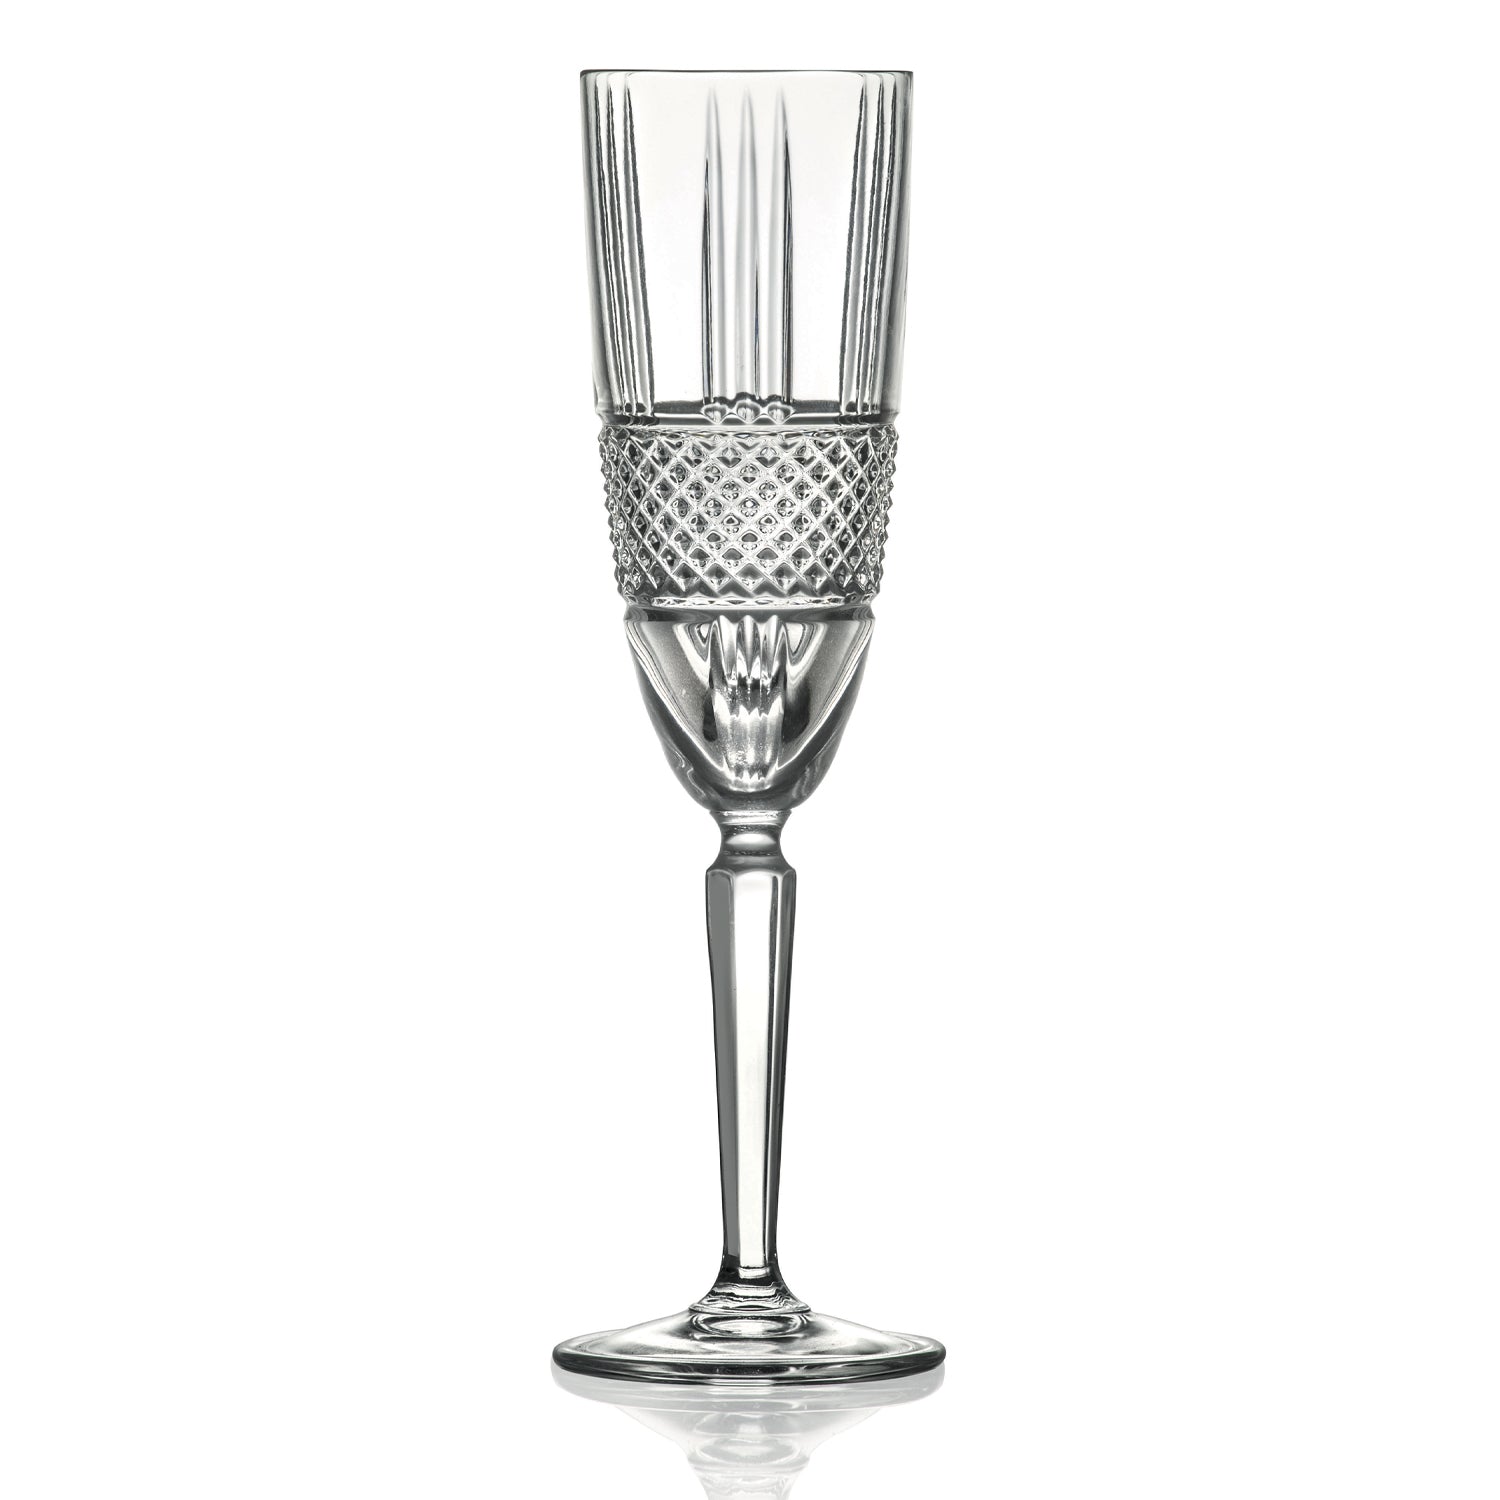 RCR (Made in Italy) Brillante Crystal Champagne Goblet Glasses, 190 ml, Set of 6